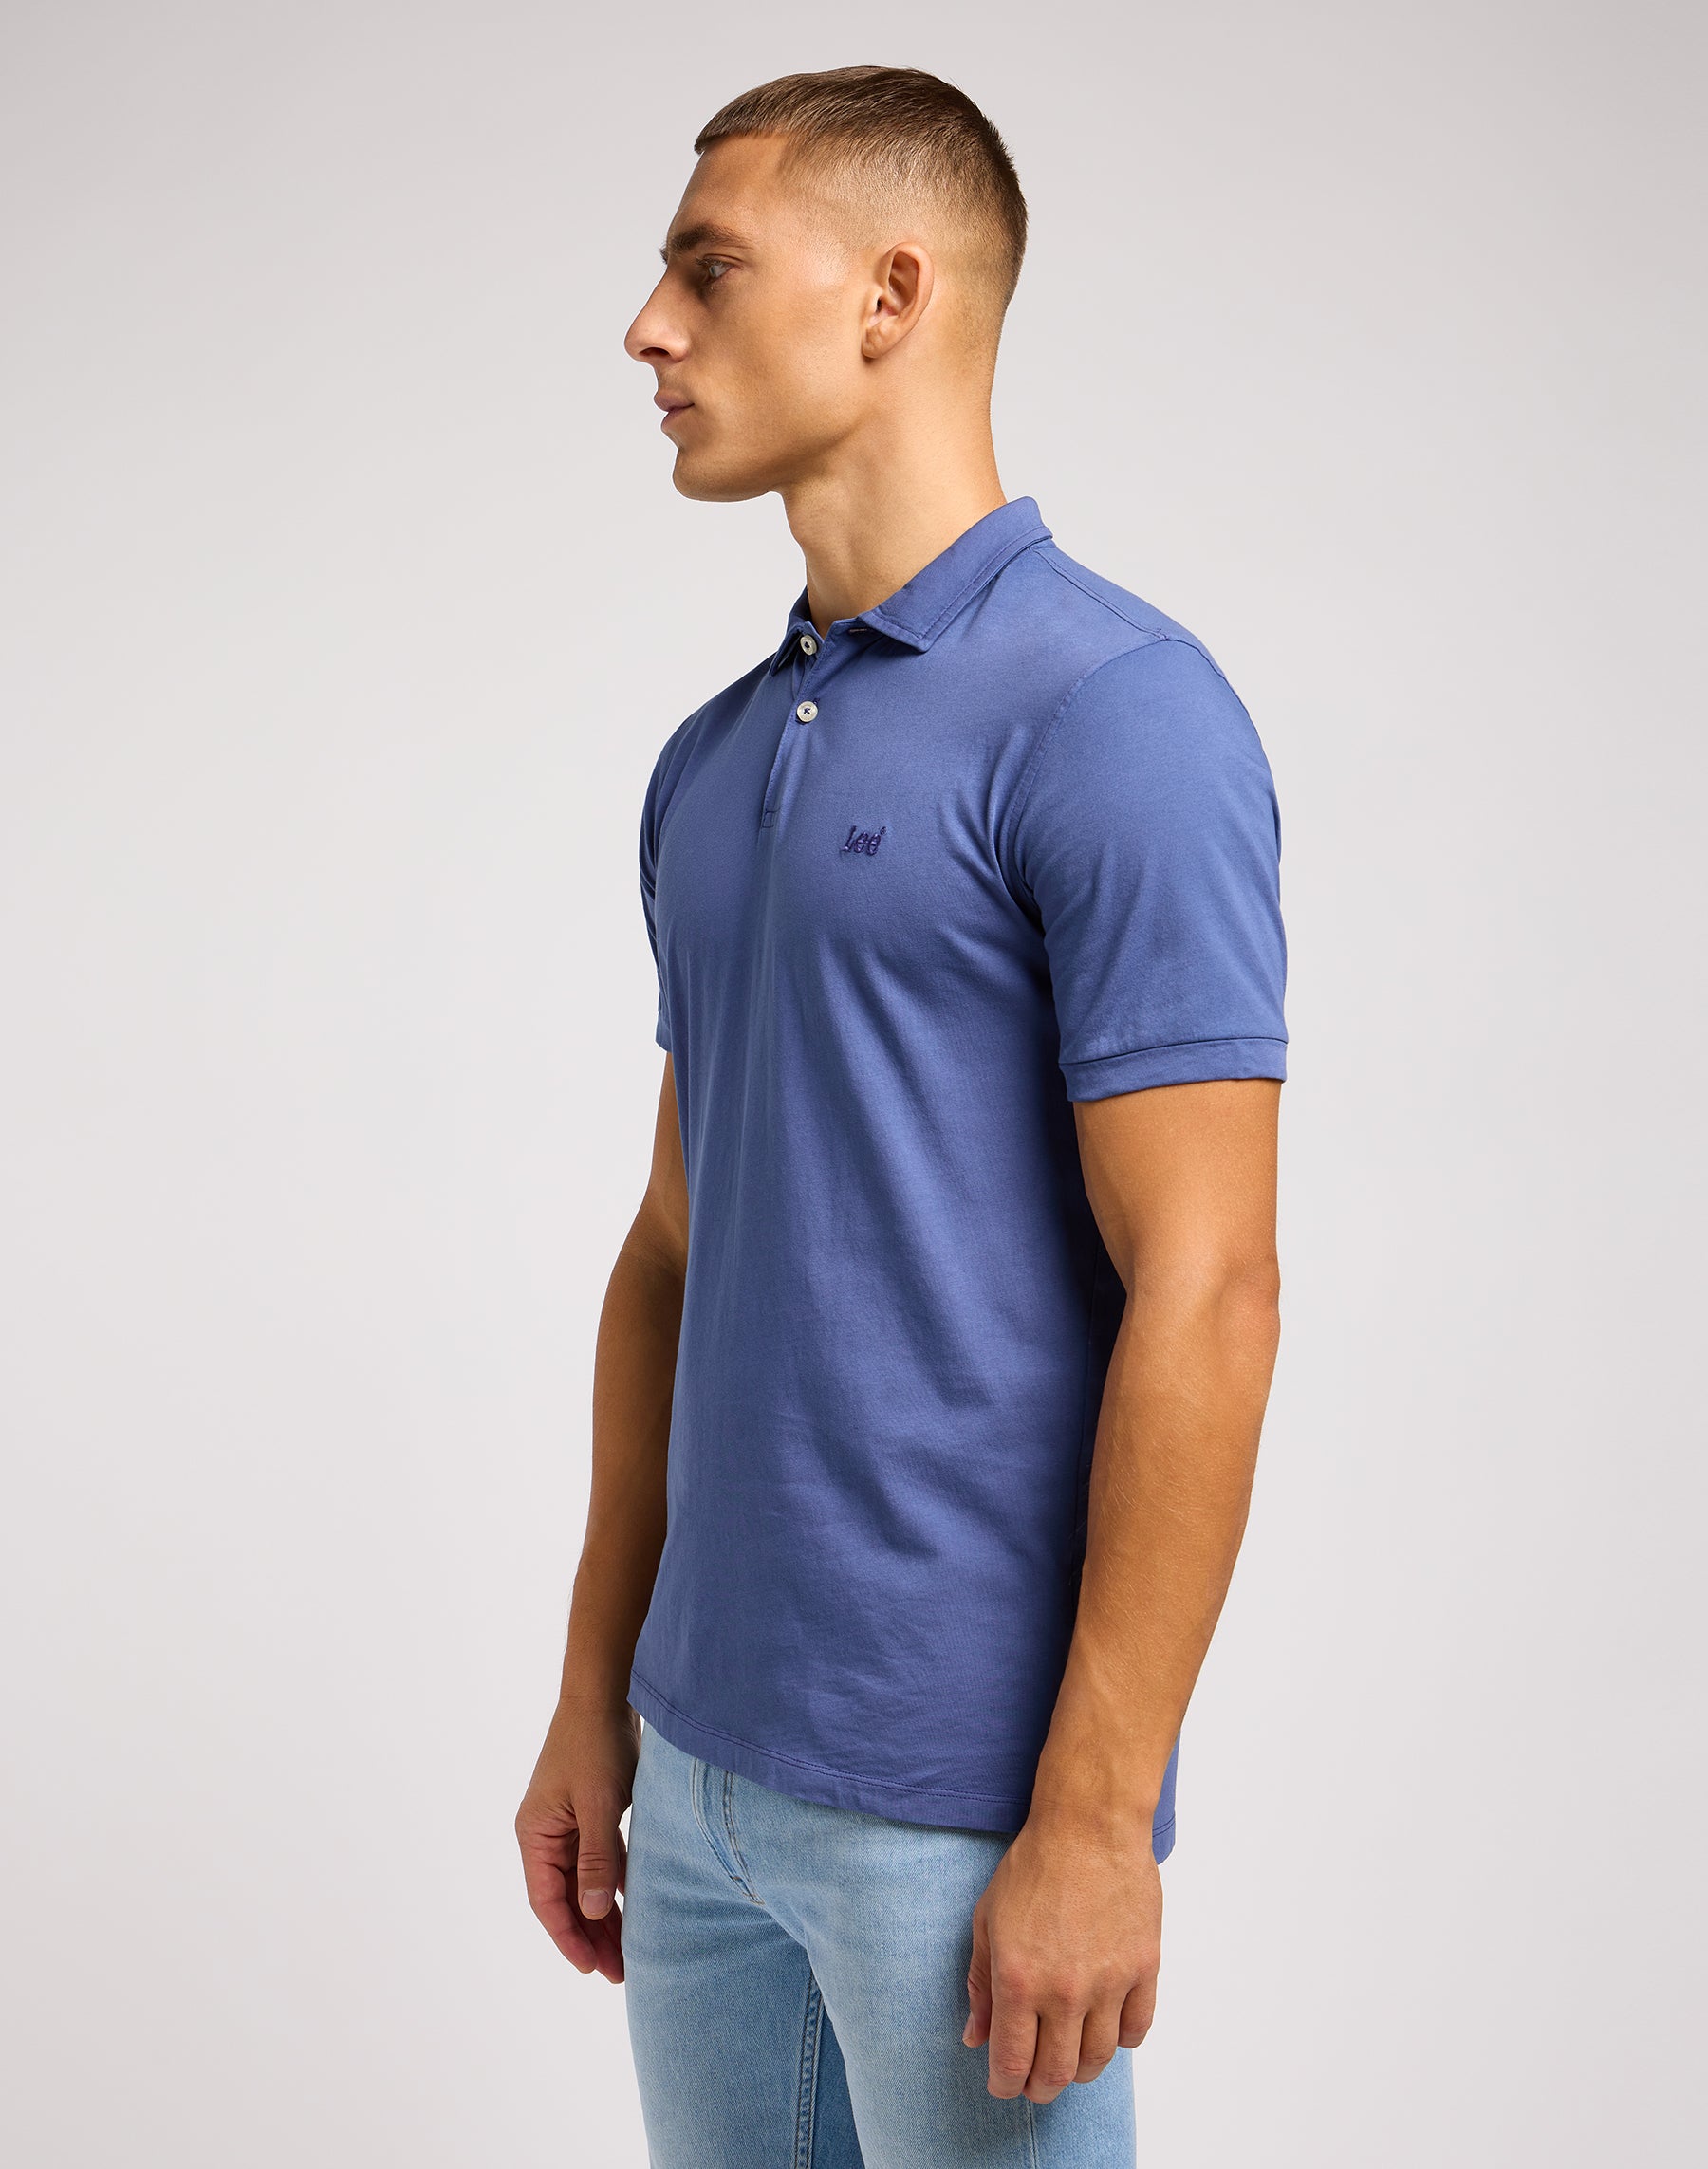 Jersey Polo in Surf Blue Polos Lee   